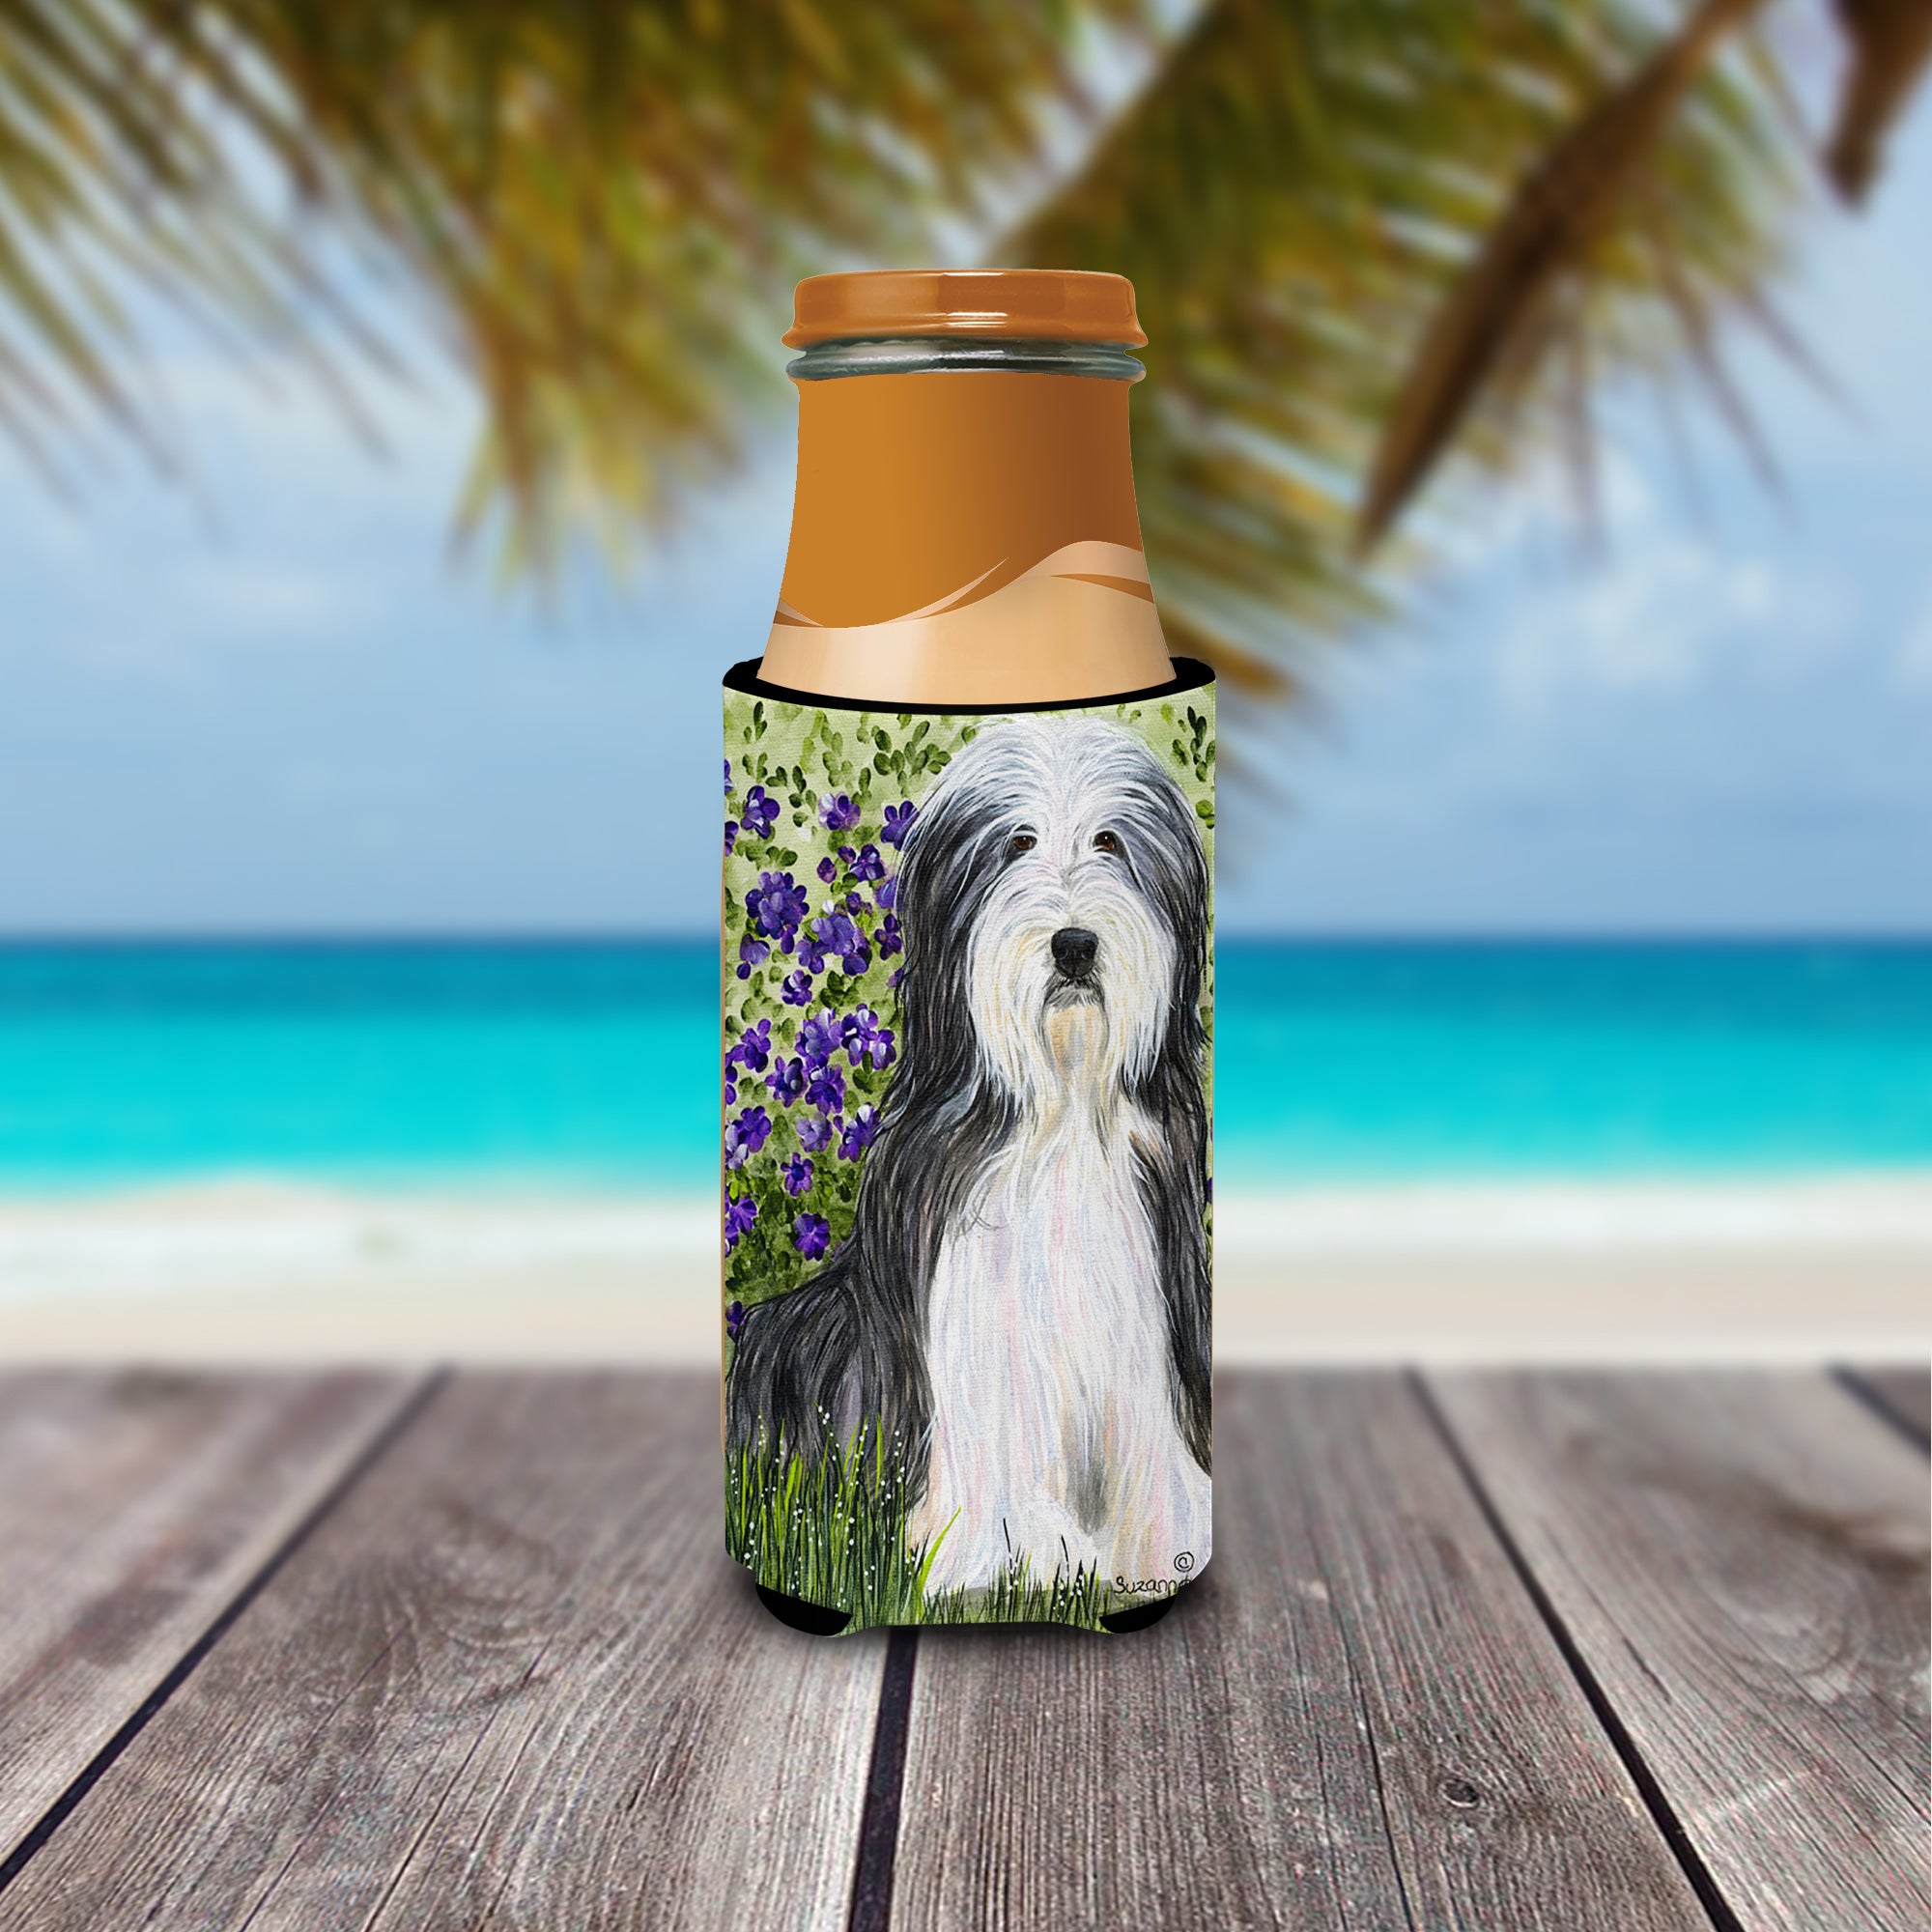 Bearded Collie Ultra Beverage Insulators for slim cans SS8022MUK